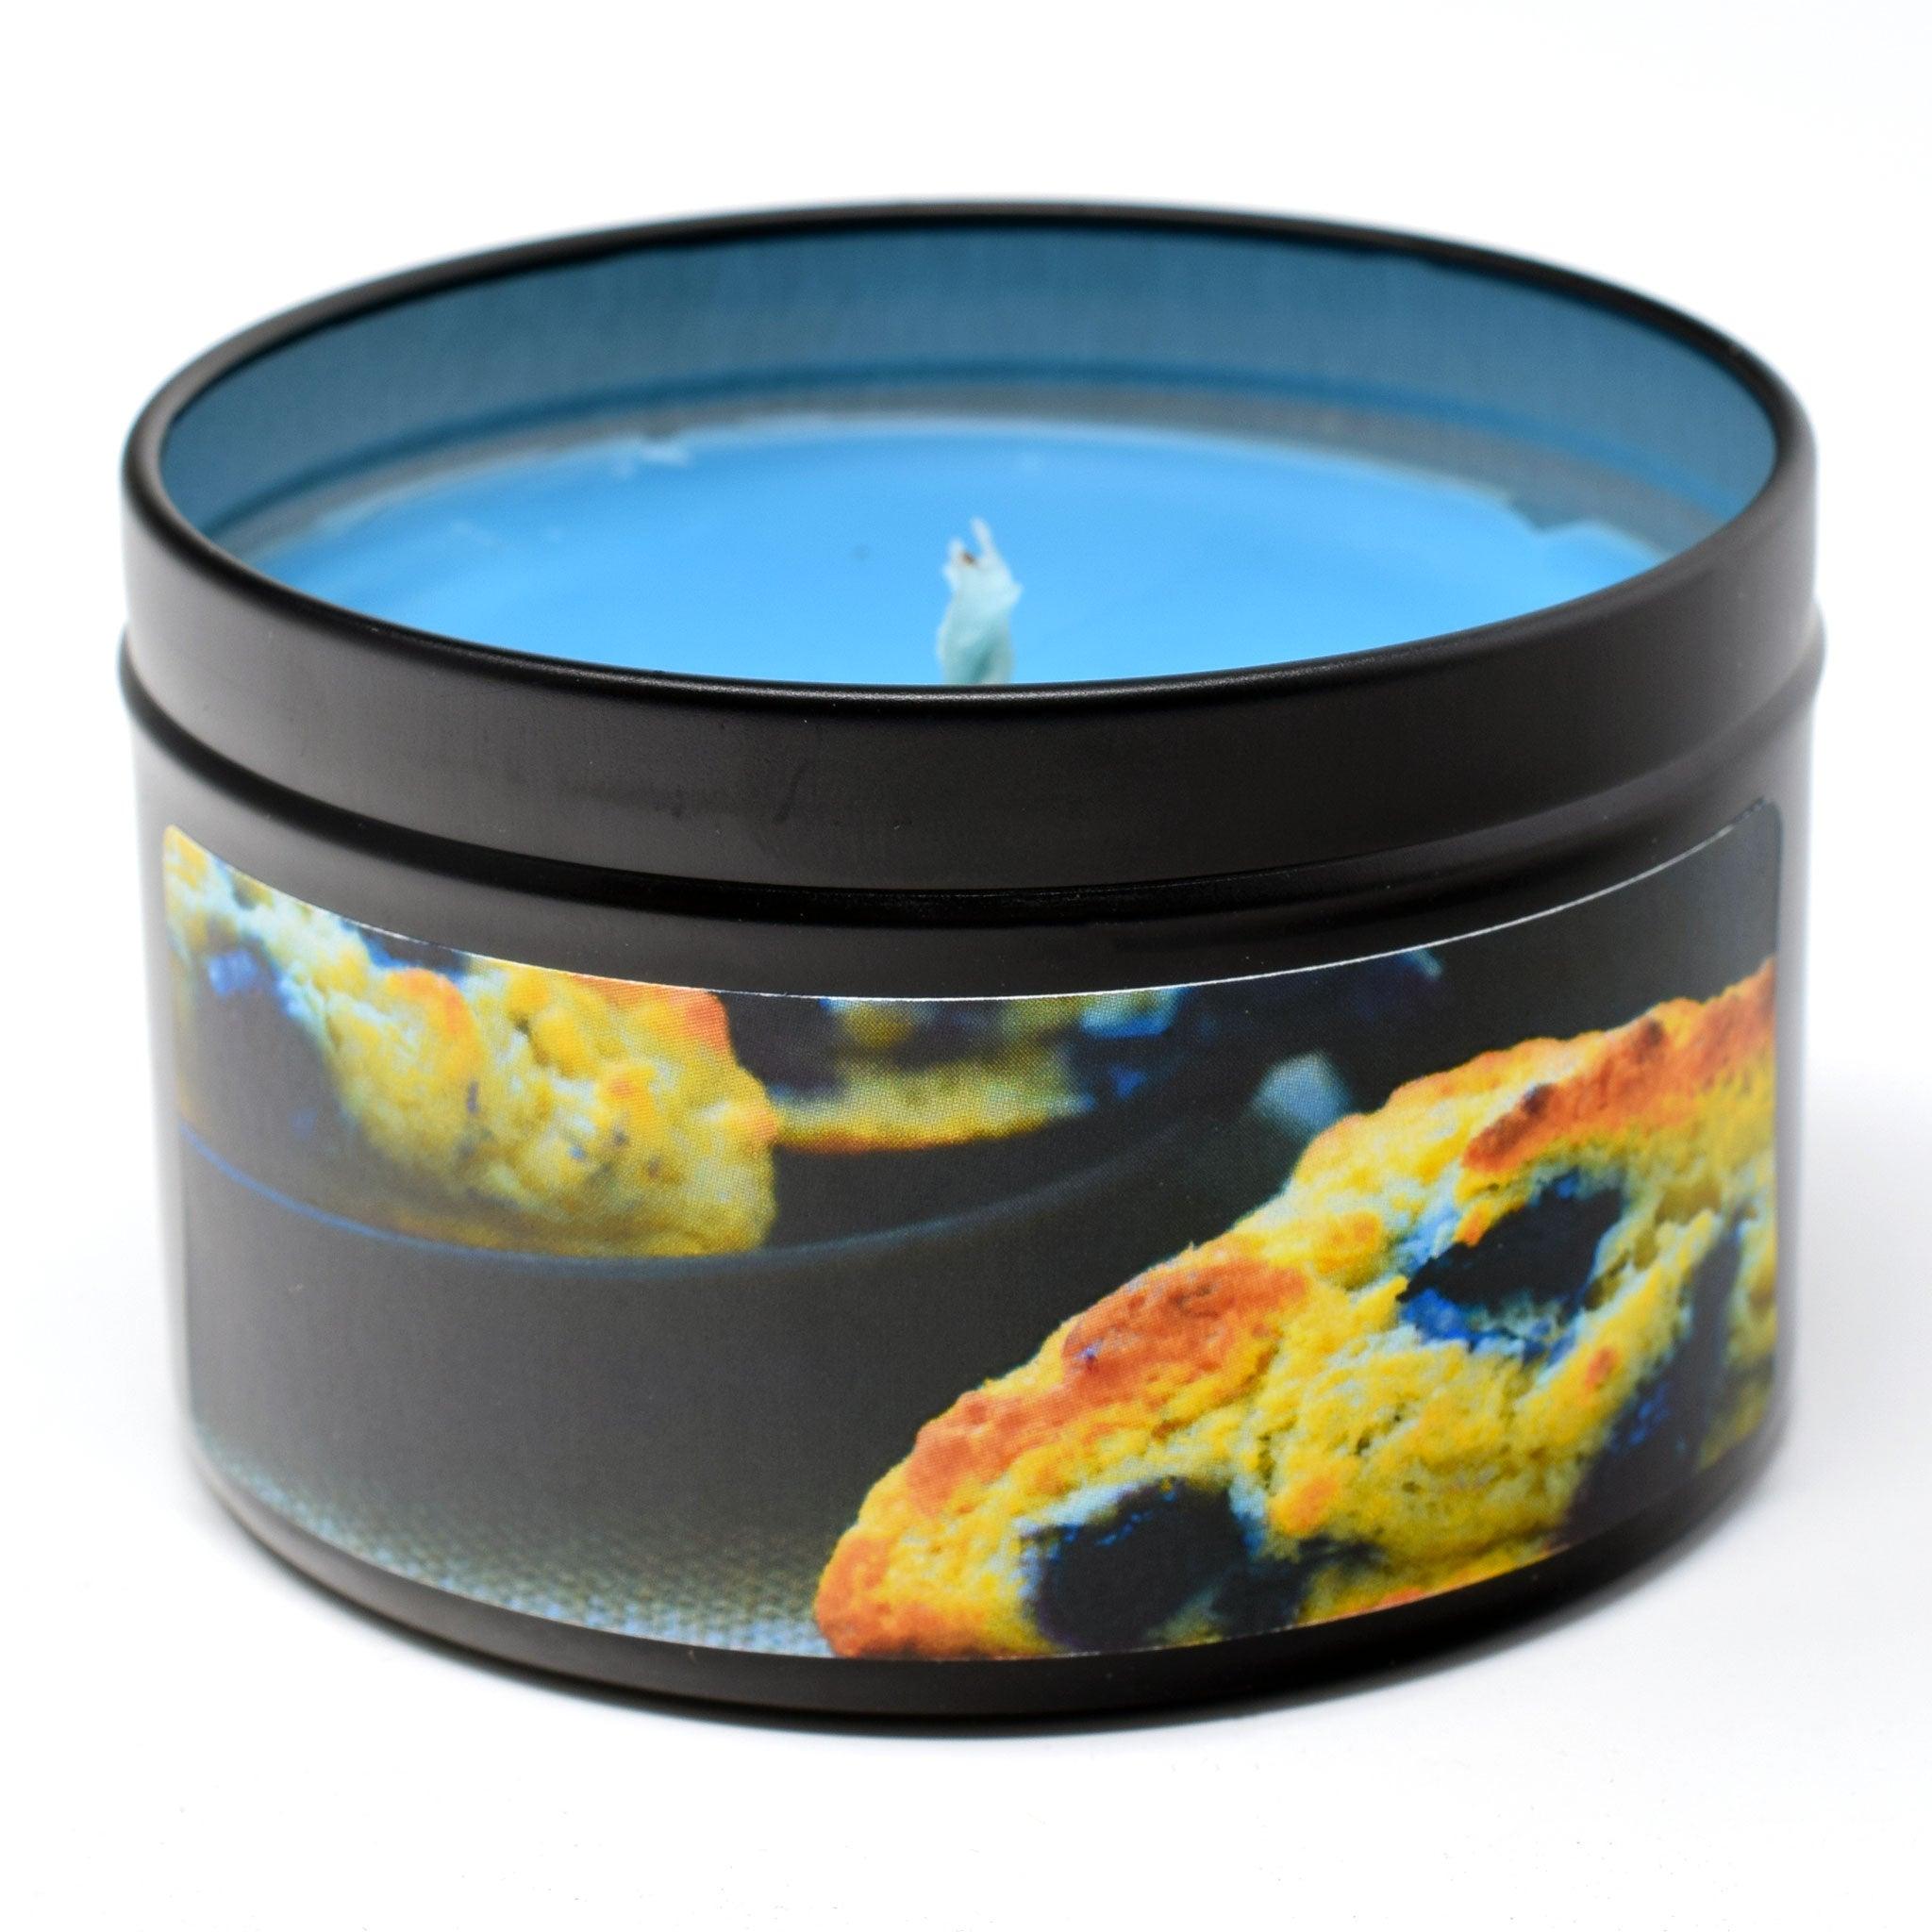 Blueberry Scones, 6oz Soy Candle Tin - Candeo Candle